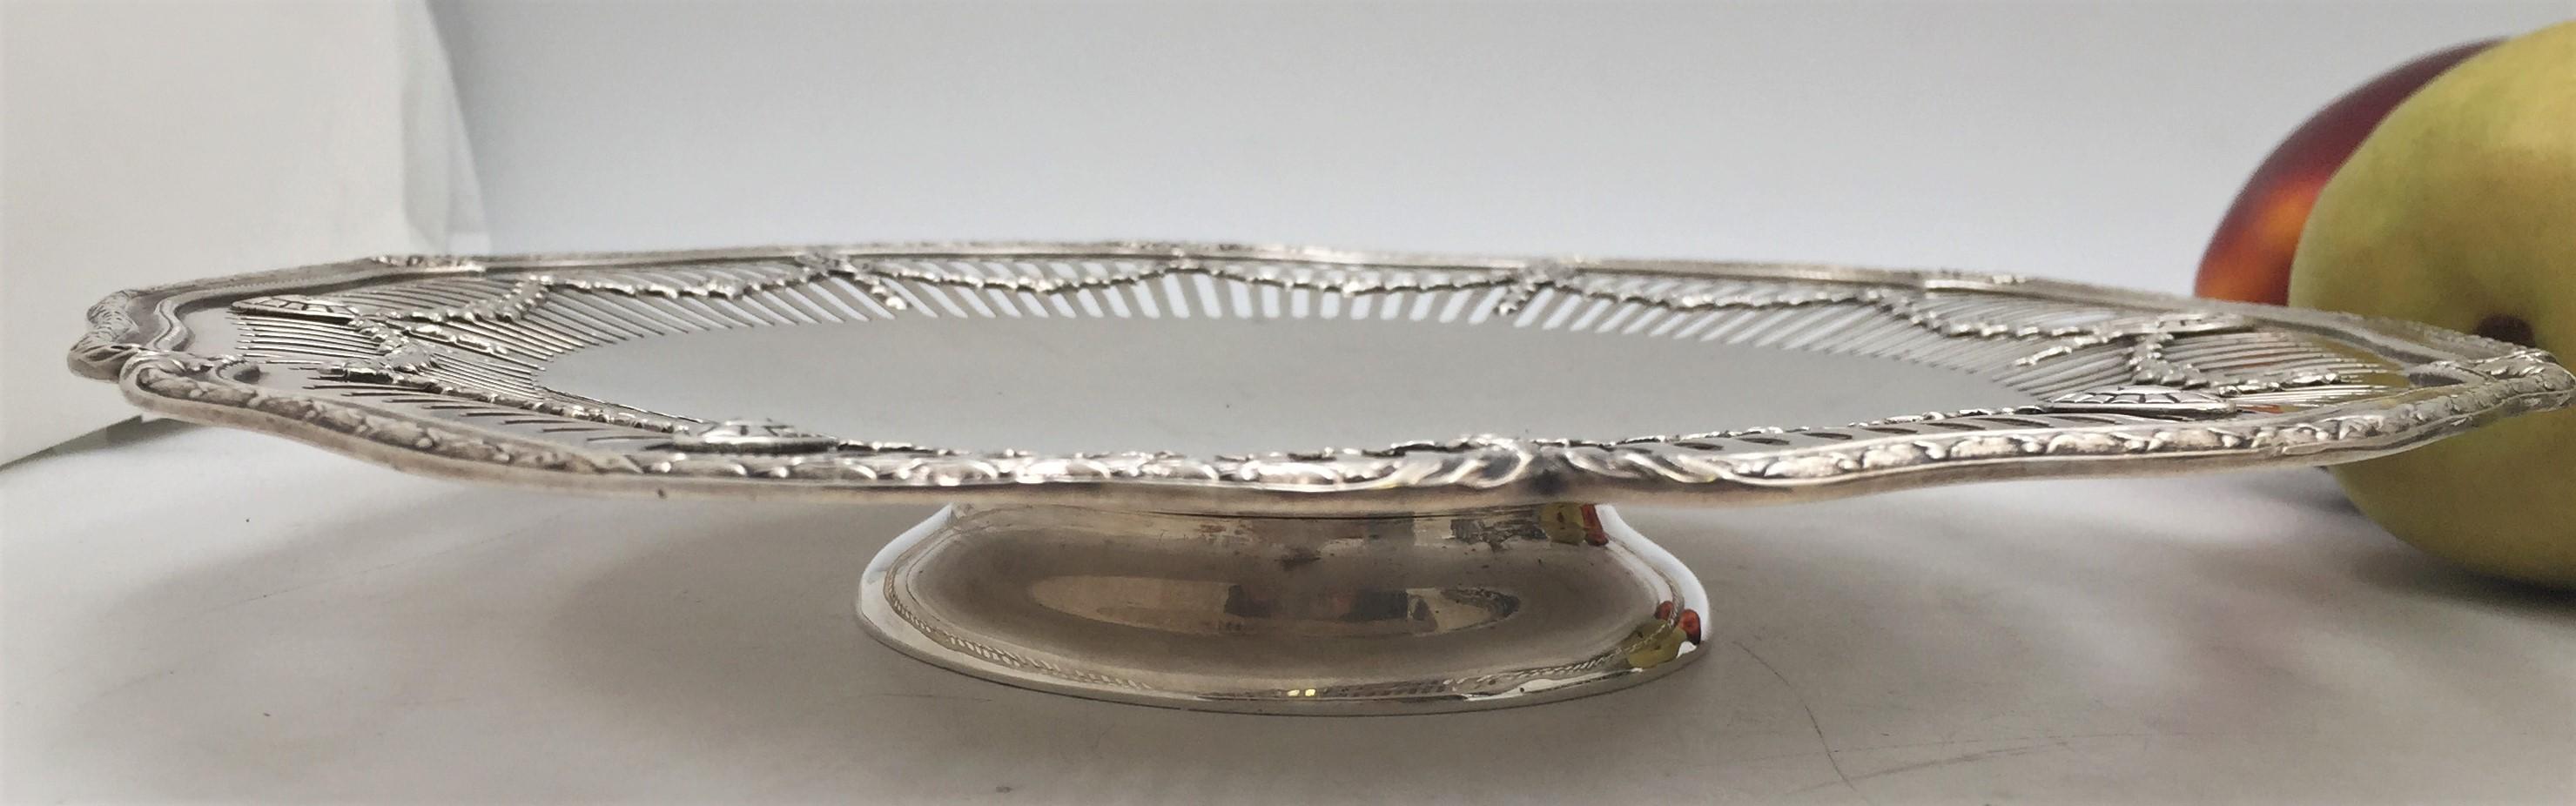 Shreve & Co.,early 20th century, sterling silver compote/ dish with beautiful pierced work, flowers, and medallions near the rim, possibly in Adam pattern. It measures 11 1/4'' in diameter by 1 3/4'' in height, weighs 17.2 troy ounces, and bears